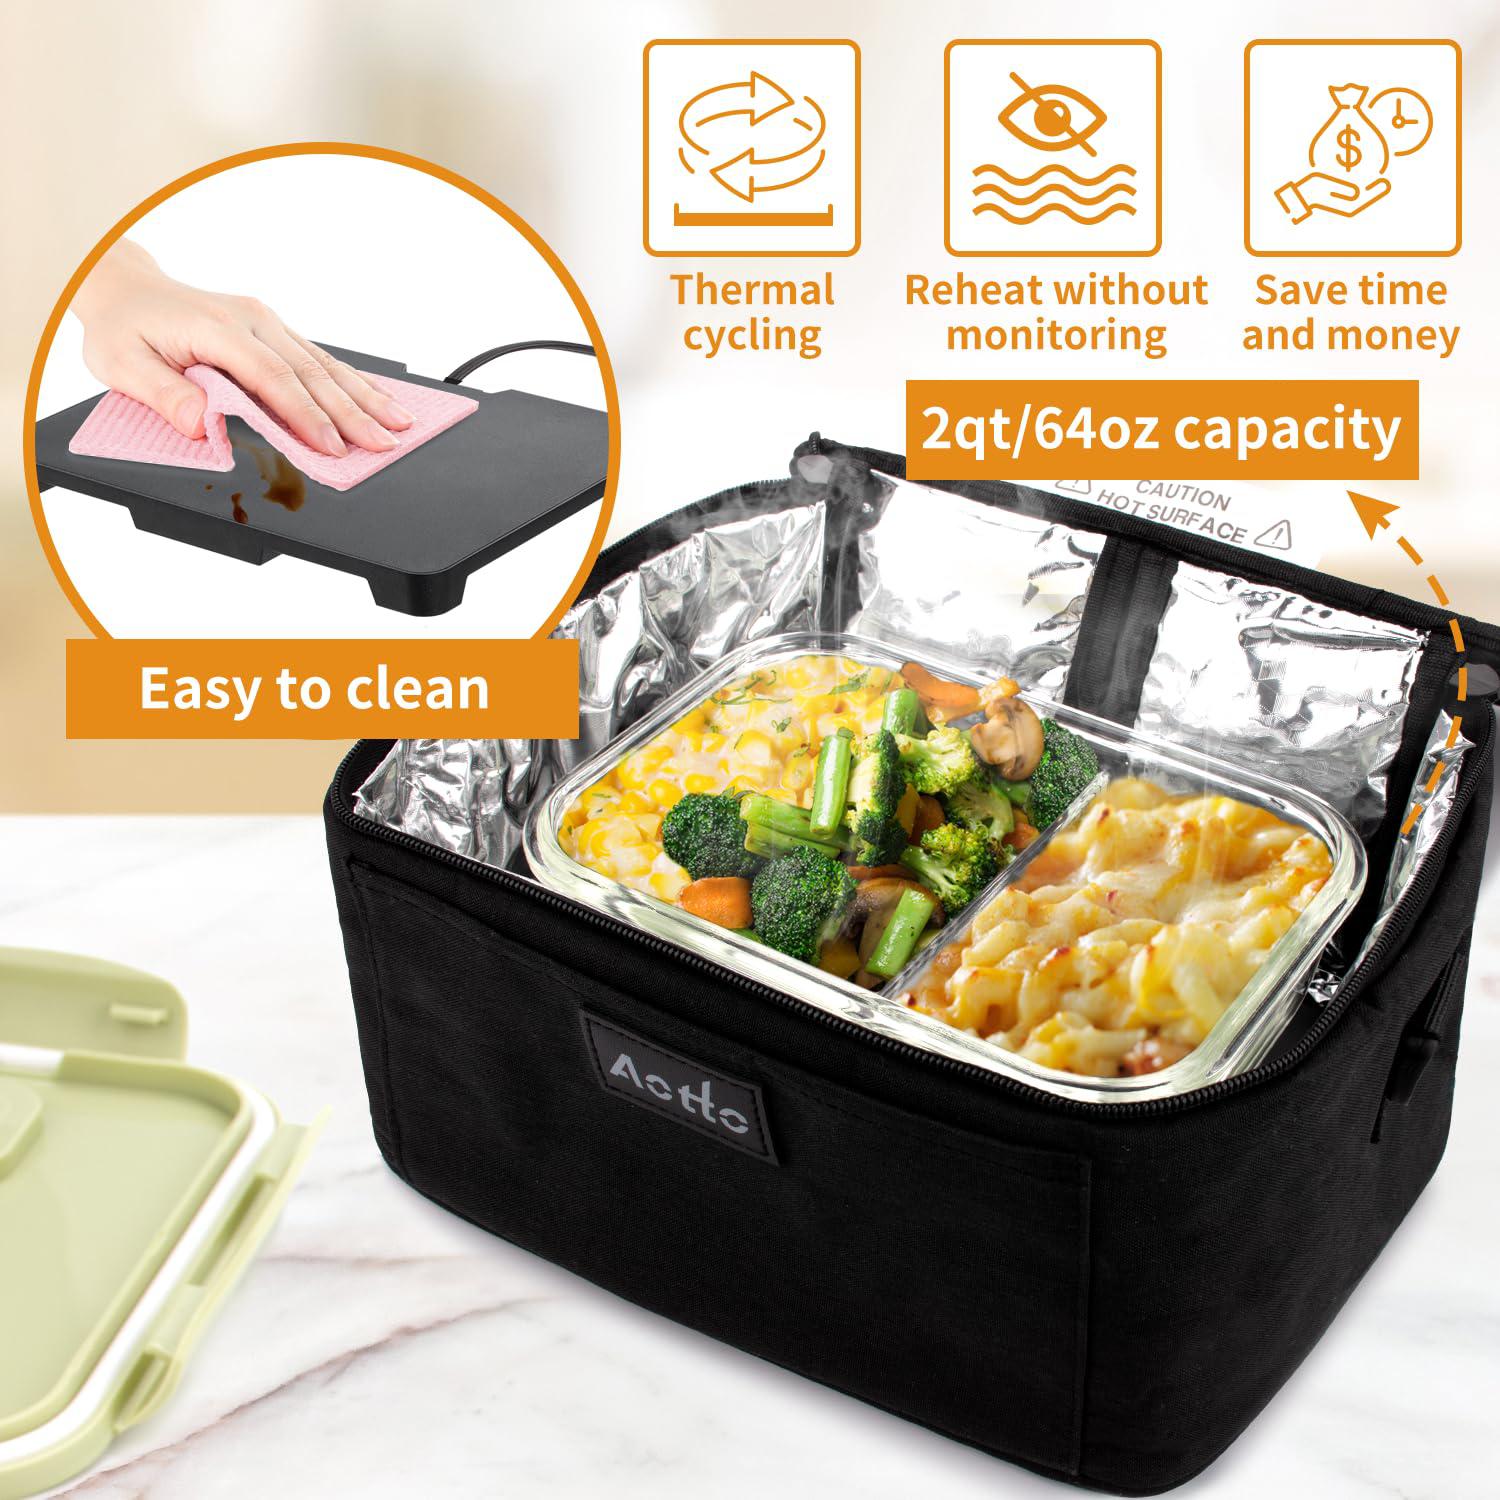 Aotto portable oven, 12v 24v 2-in-1 car food warmer mini portable microwave, aotto personal heated lunch box warmer for work reheat